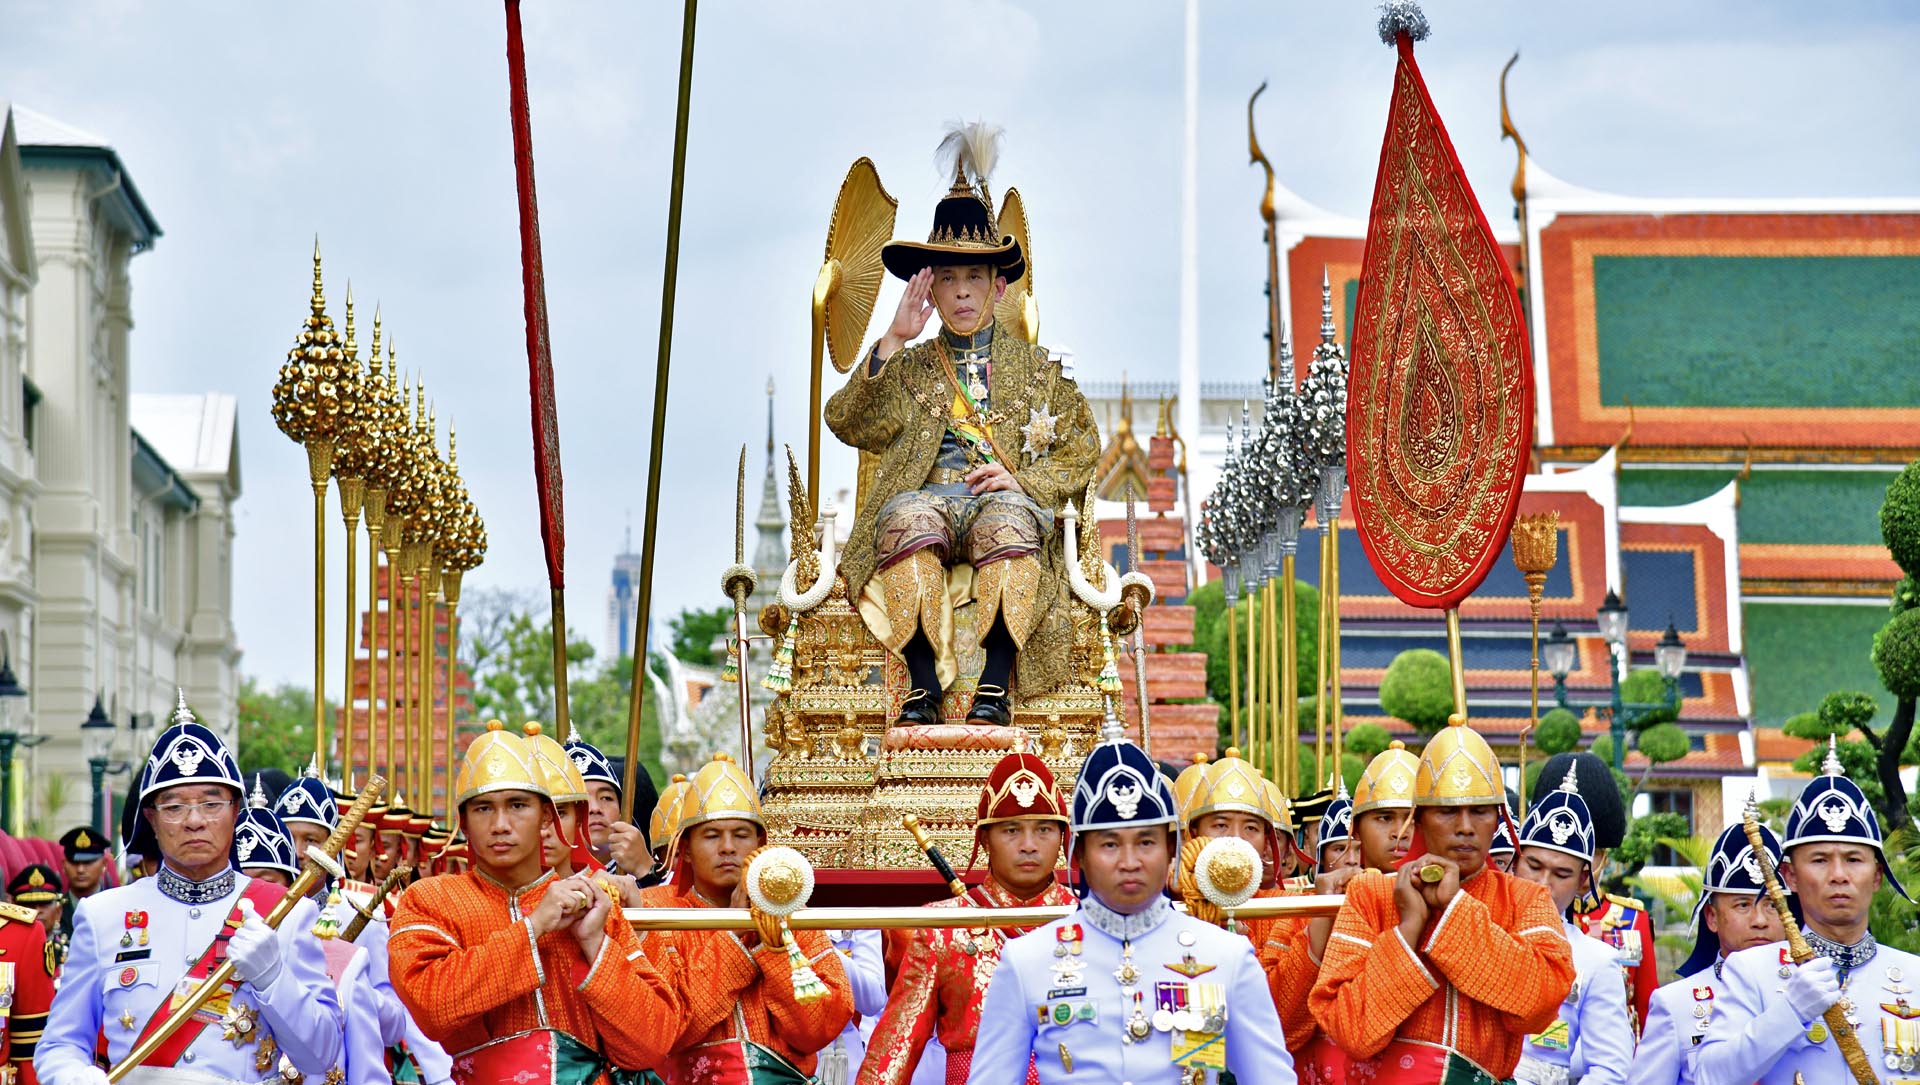 King Vajiralongkorn being carried in a royal palanquin to Emerald Buddha during his coronation ceremony. Photo: Gov’t Public Relations Dept.